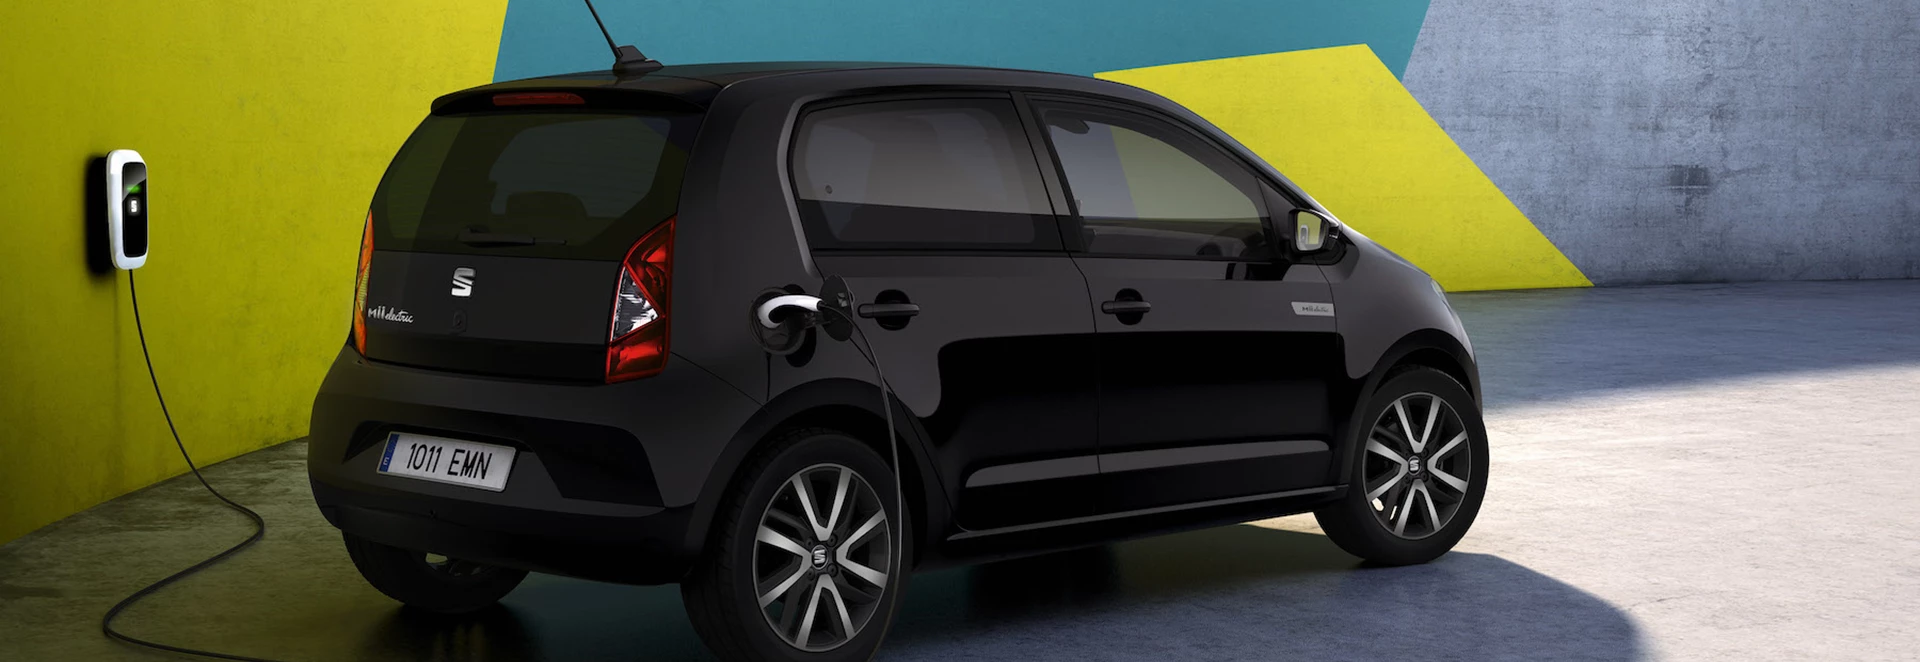 Prices announced for new Seat Mii Electric